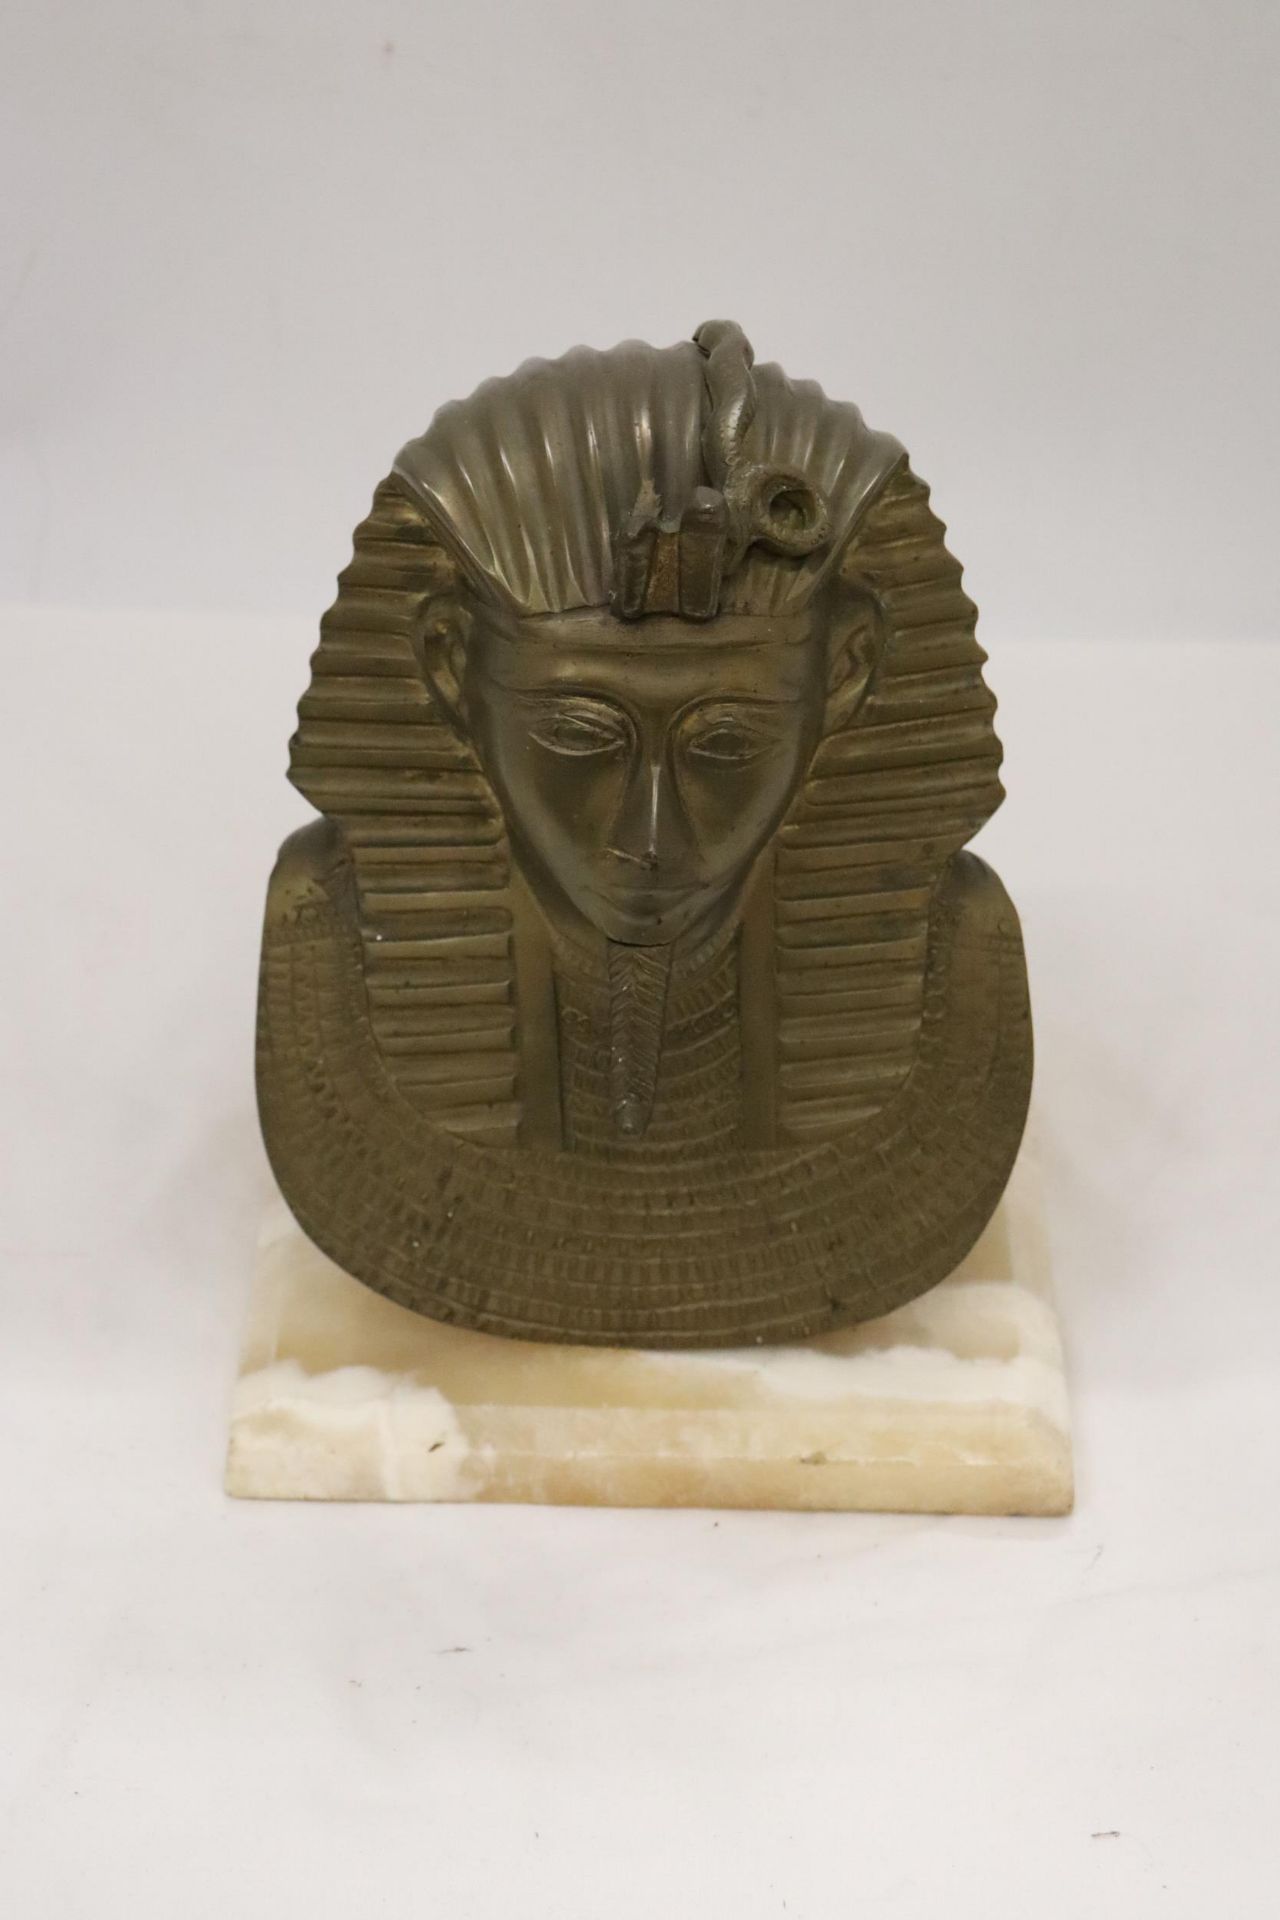 A LARGE HEAVY EGYPTIAN HEAD ON MARBLE BASE - Image 2 of 6